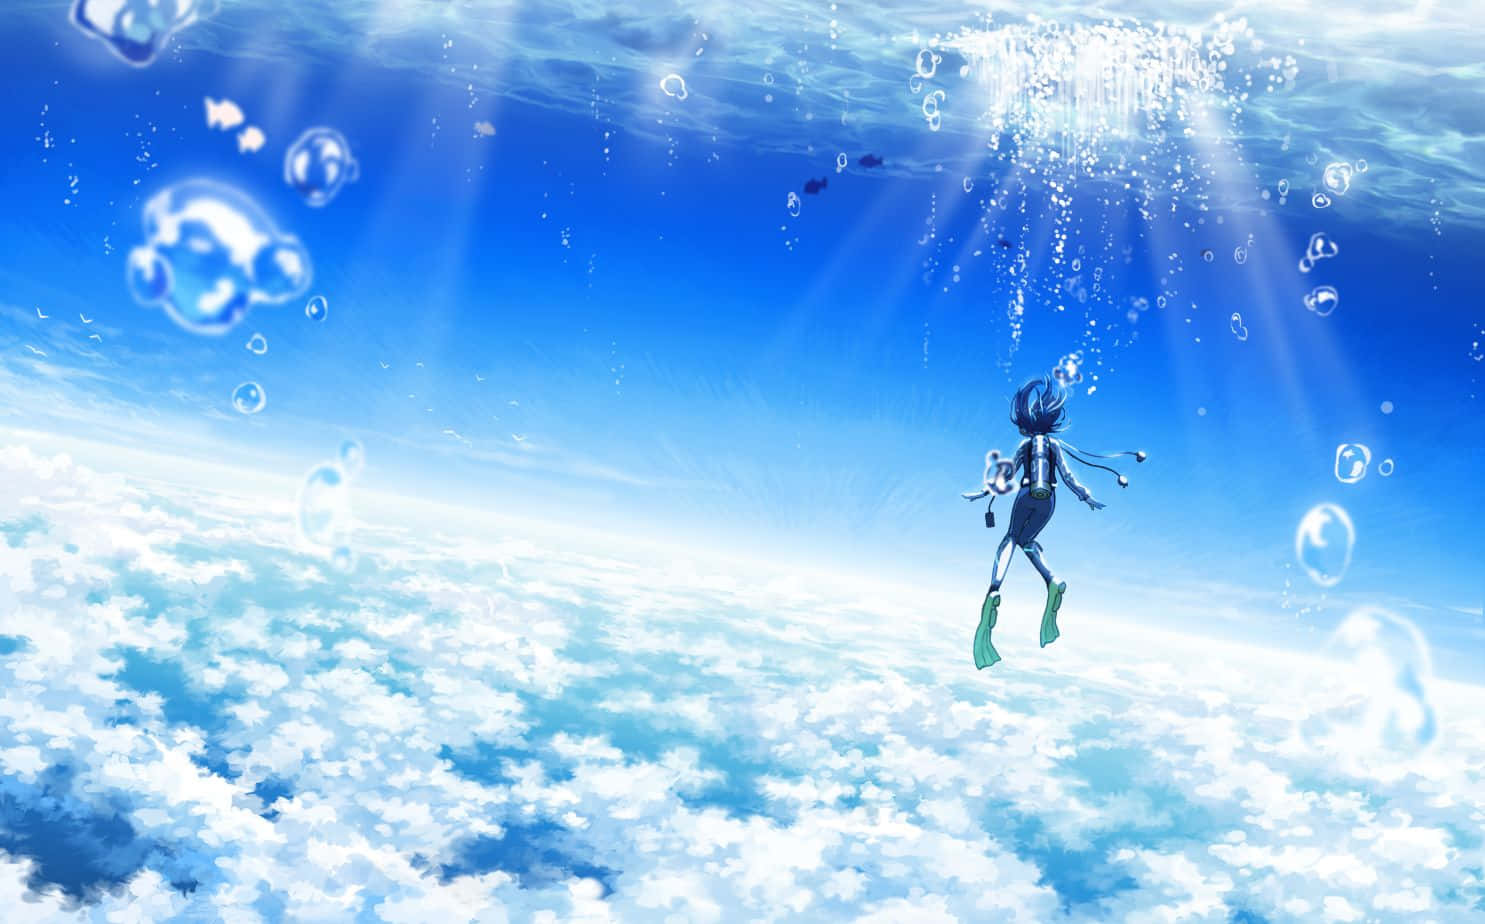 Download Cool Anime Boy Blue Sky Clouds Floating Inthe Air Wallpaper |  Wallpapers.com